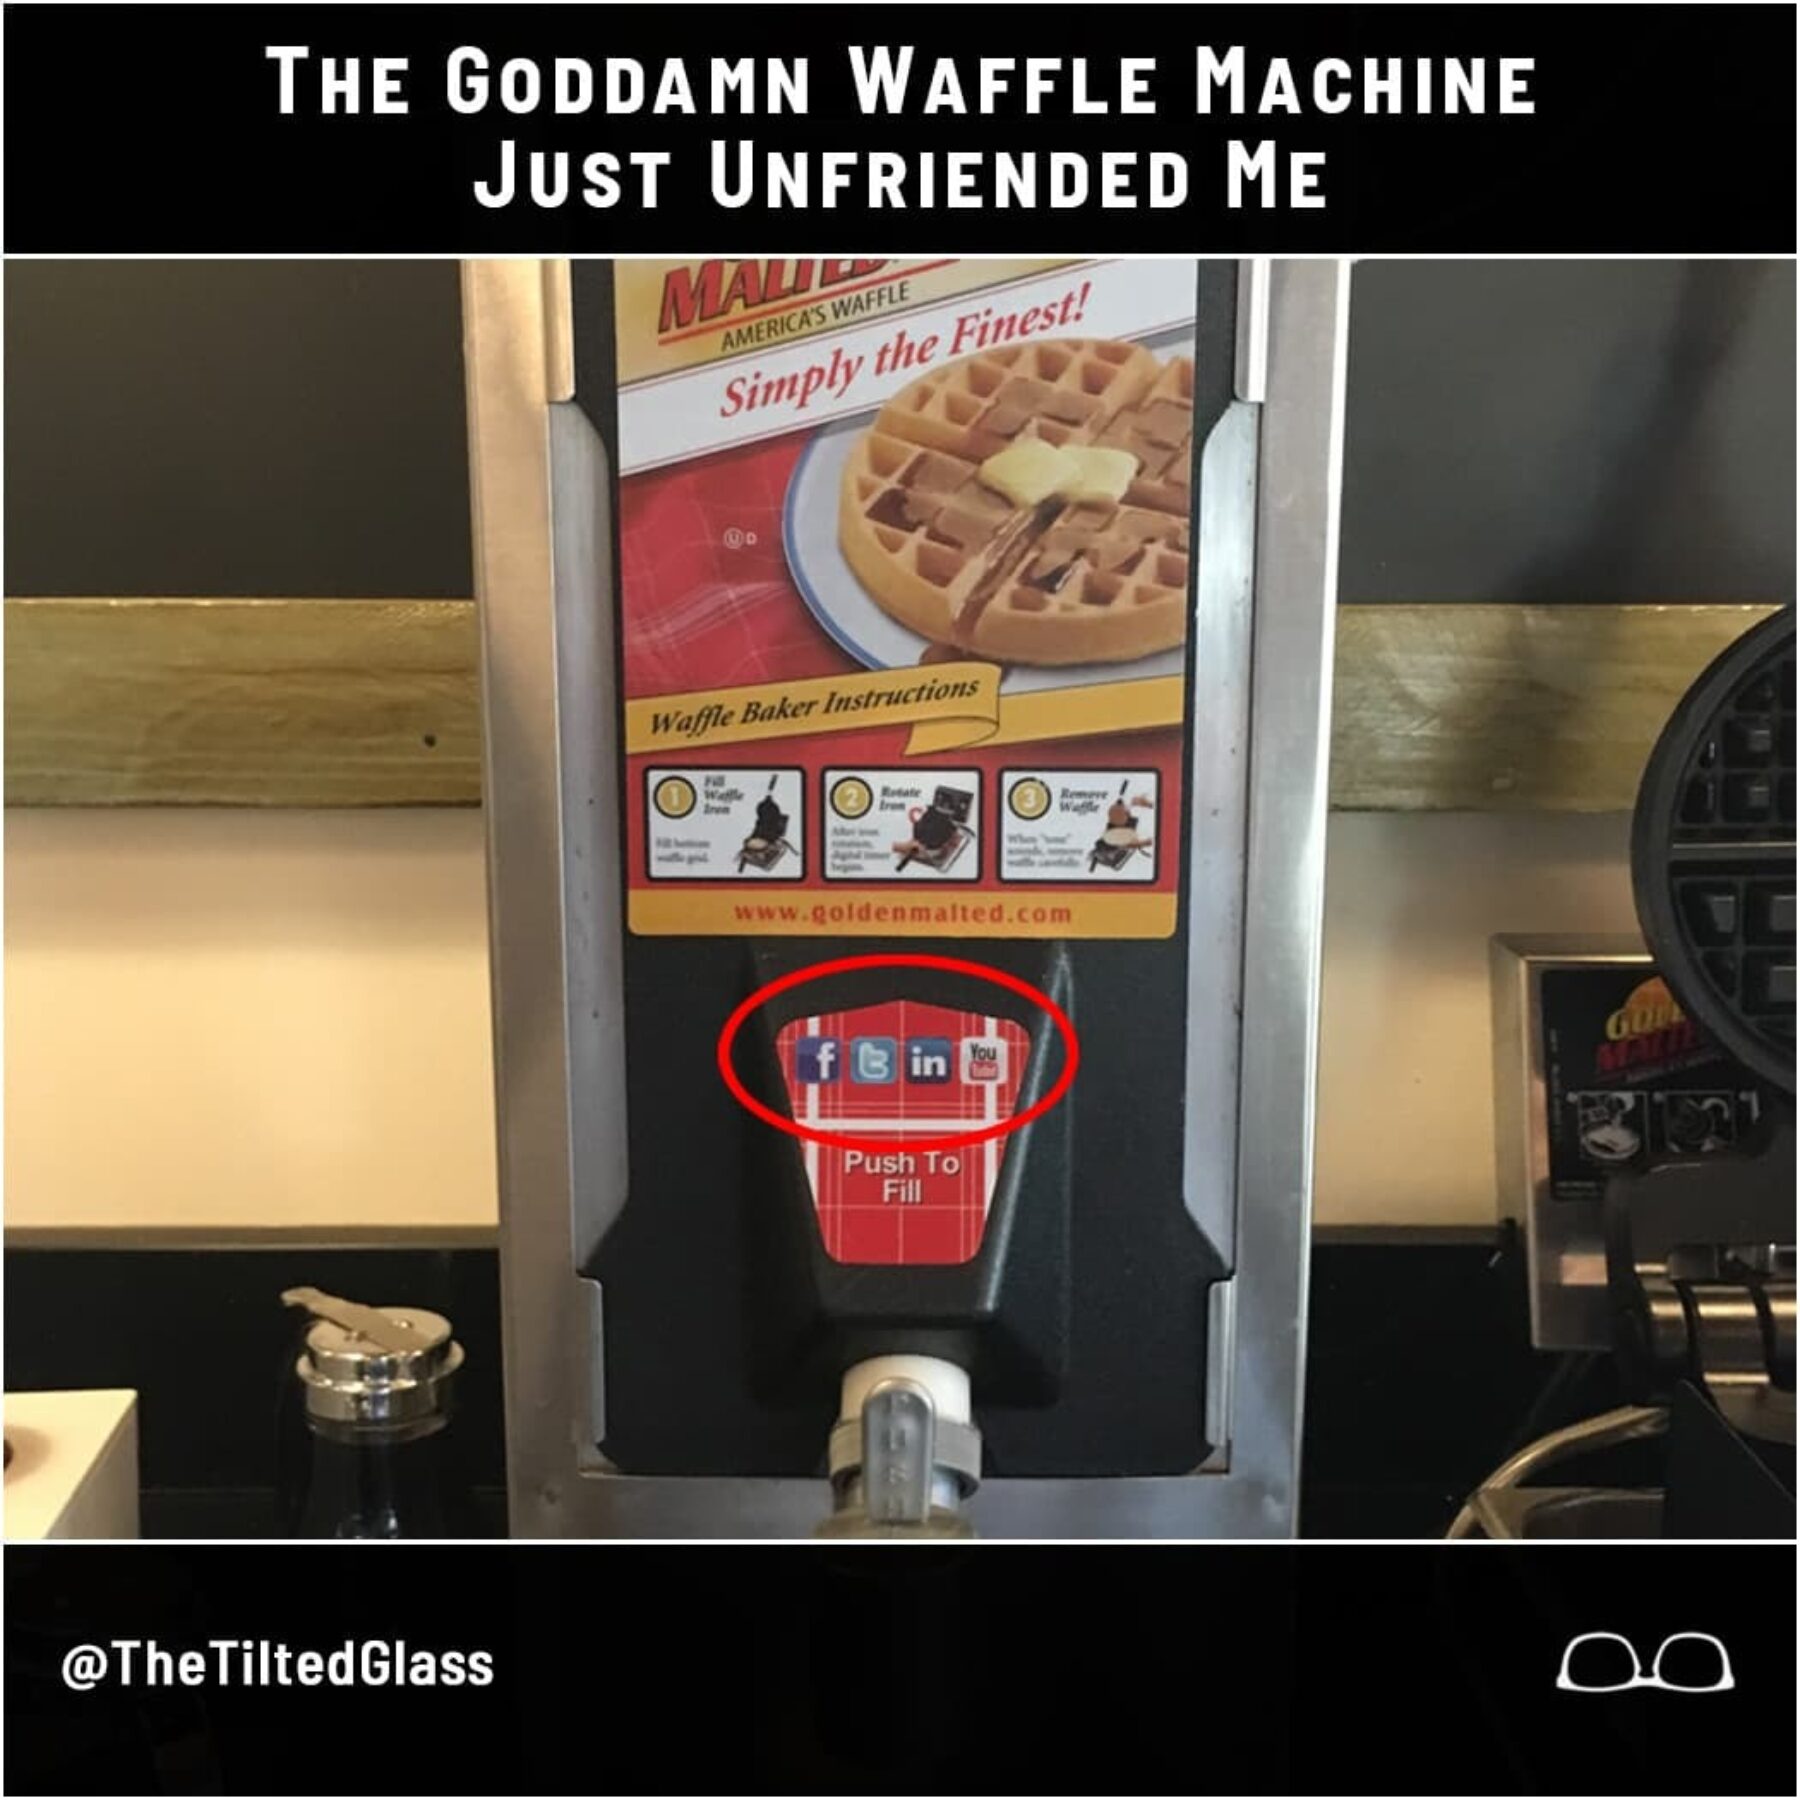 The Goddamn Waffle Machine Just Unfriended Me